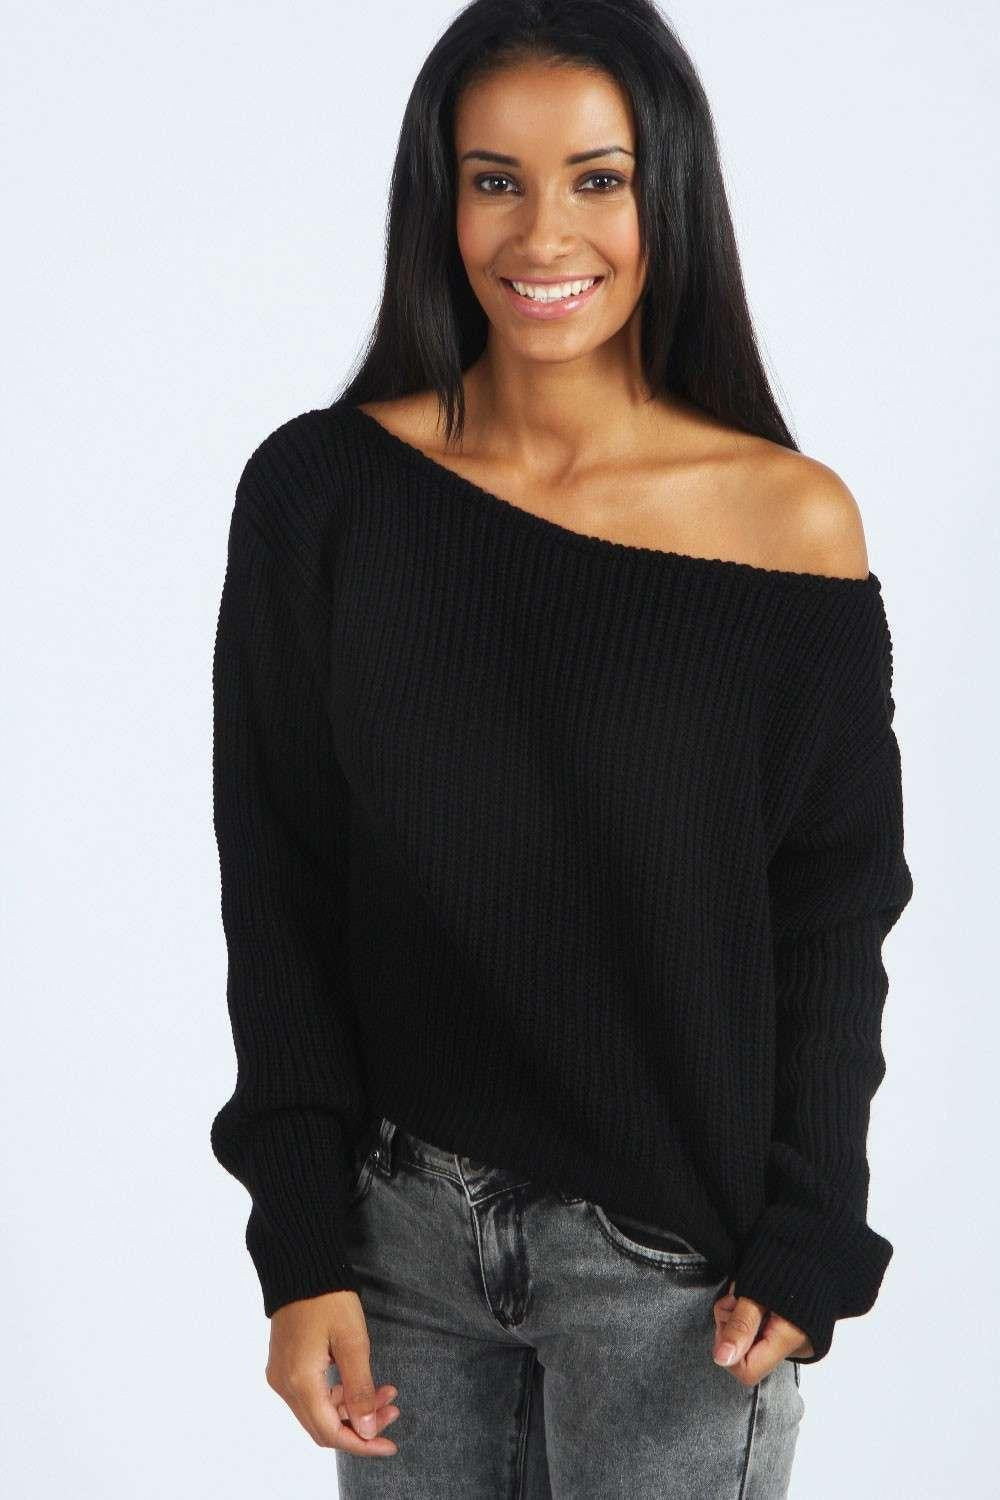 Off Shoulder Pullover Knit Loose Pure Color Sweater - Meet Yours Fashion - 1